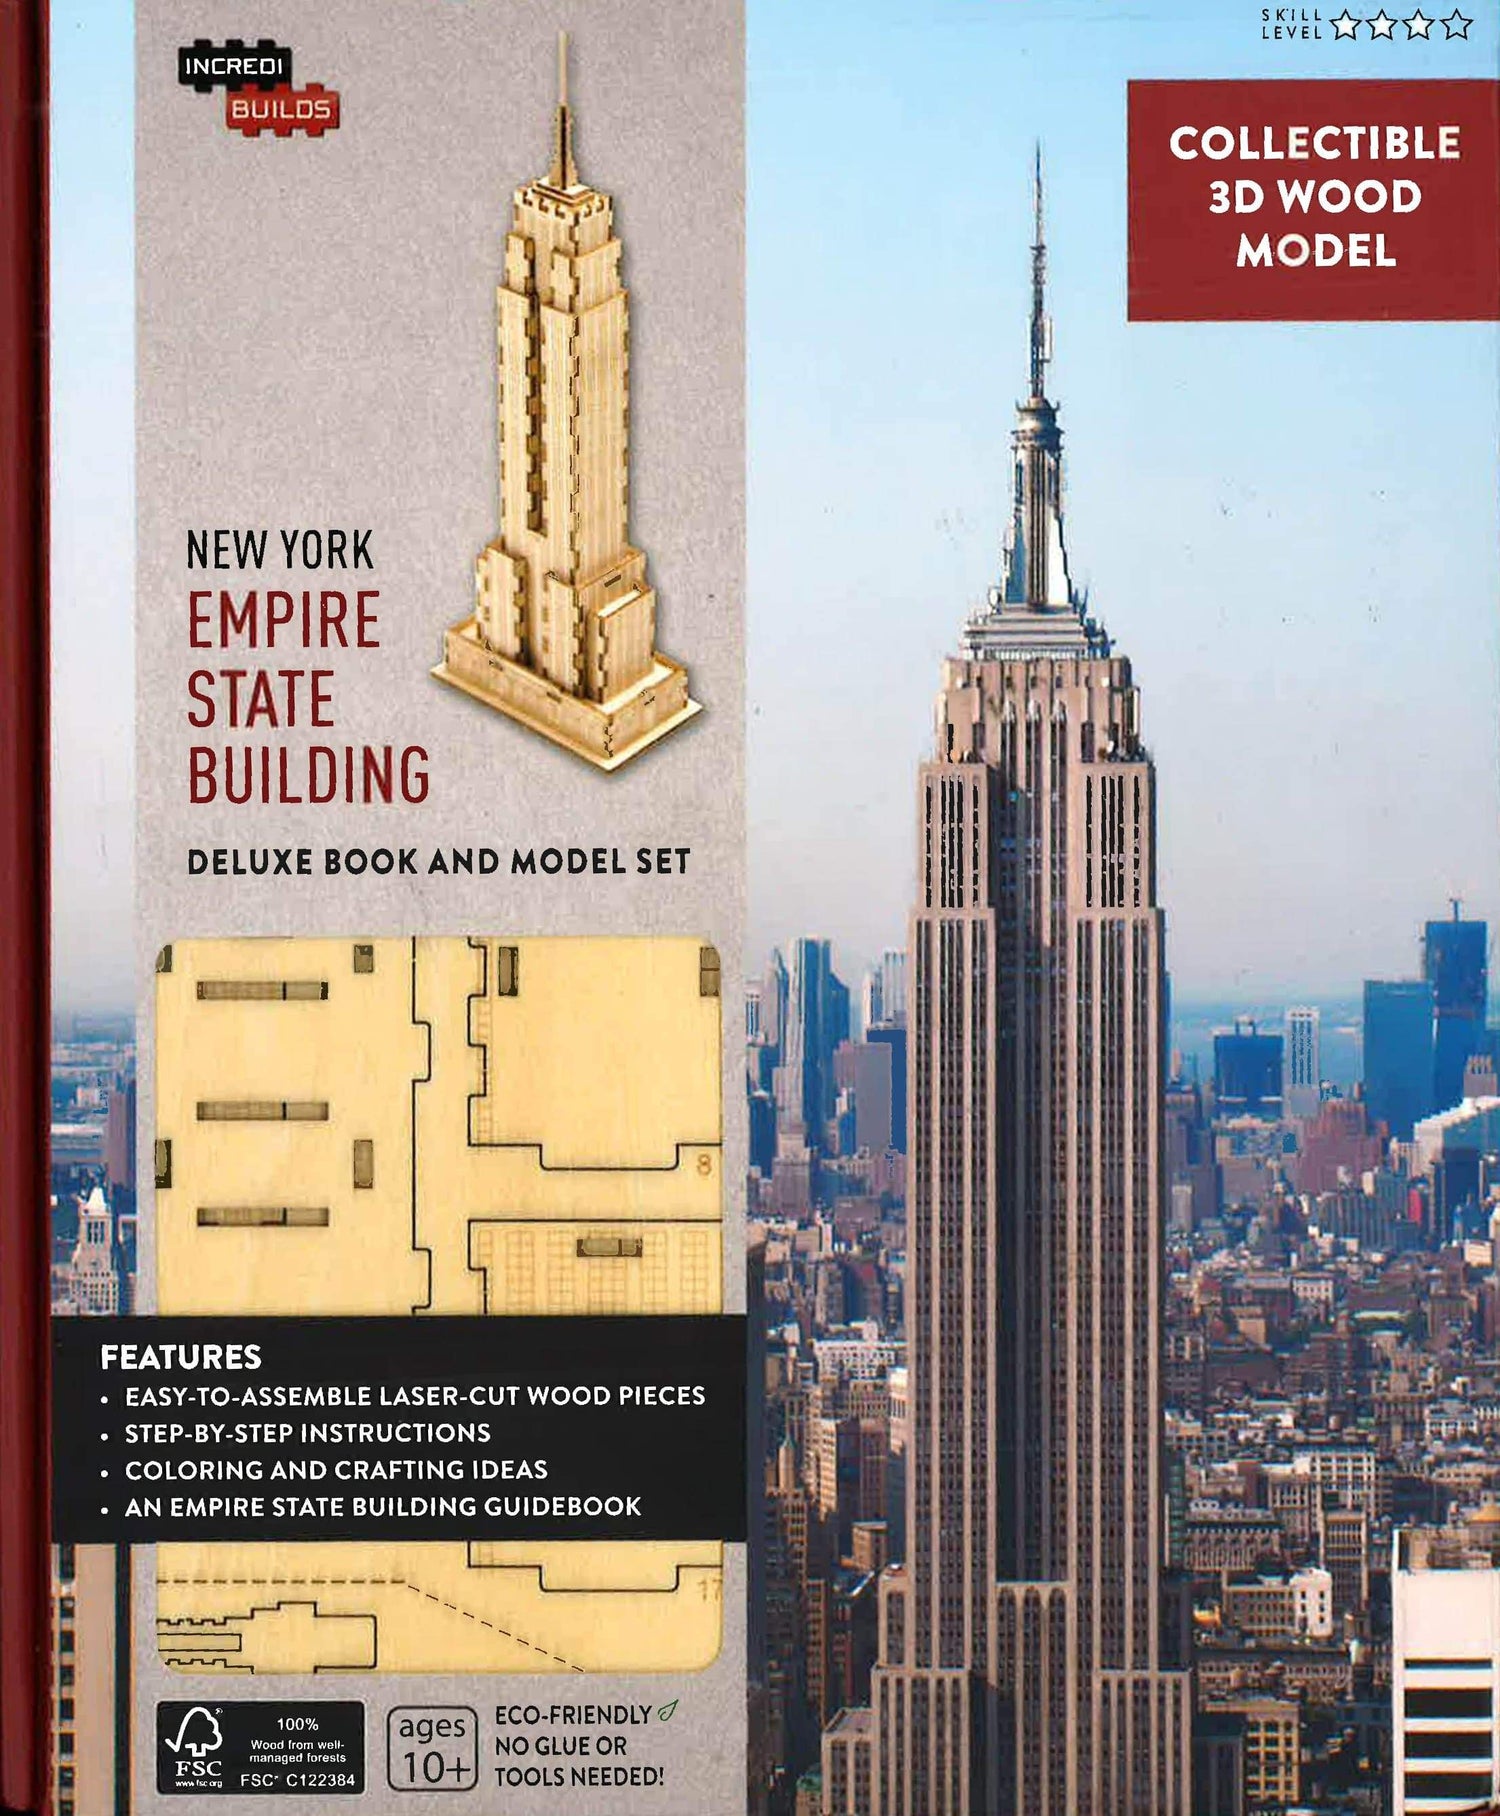 New York Empire State Building Deluxe Book And Model Set (Incredibuilds)